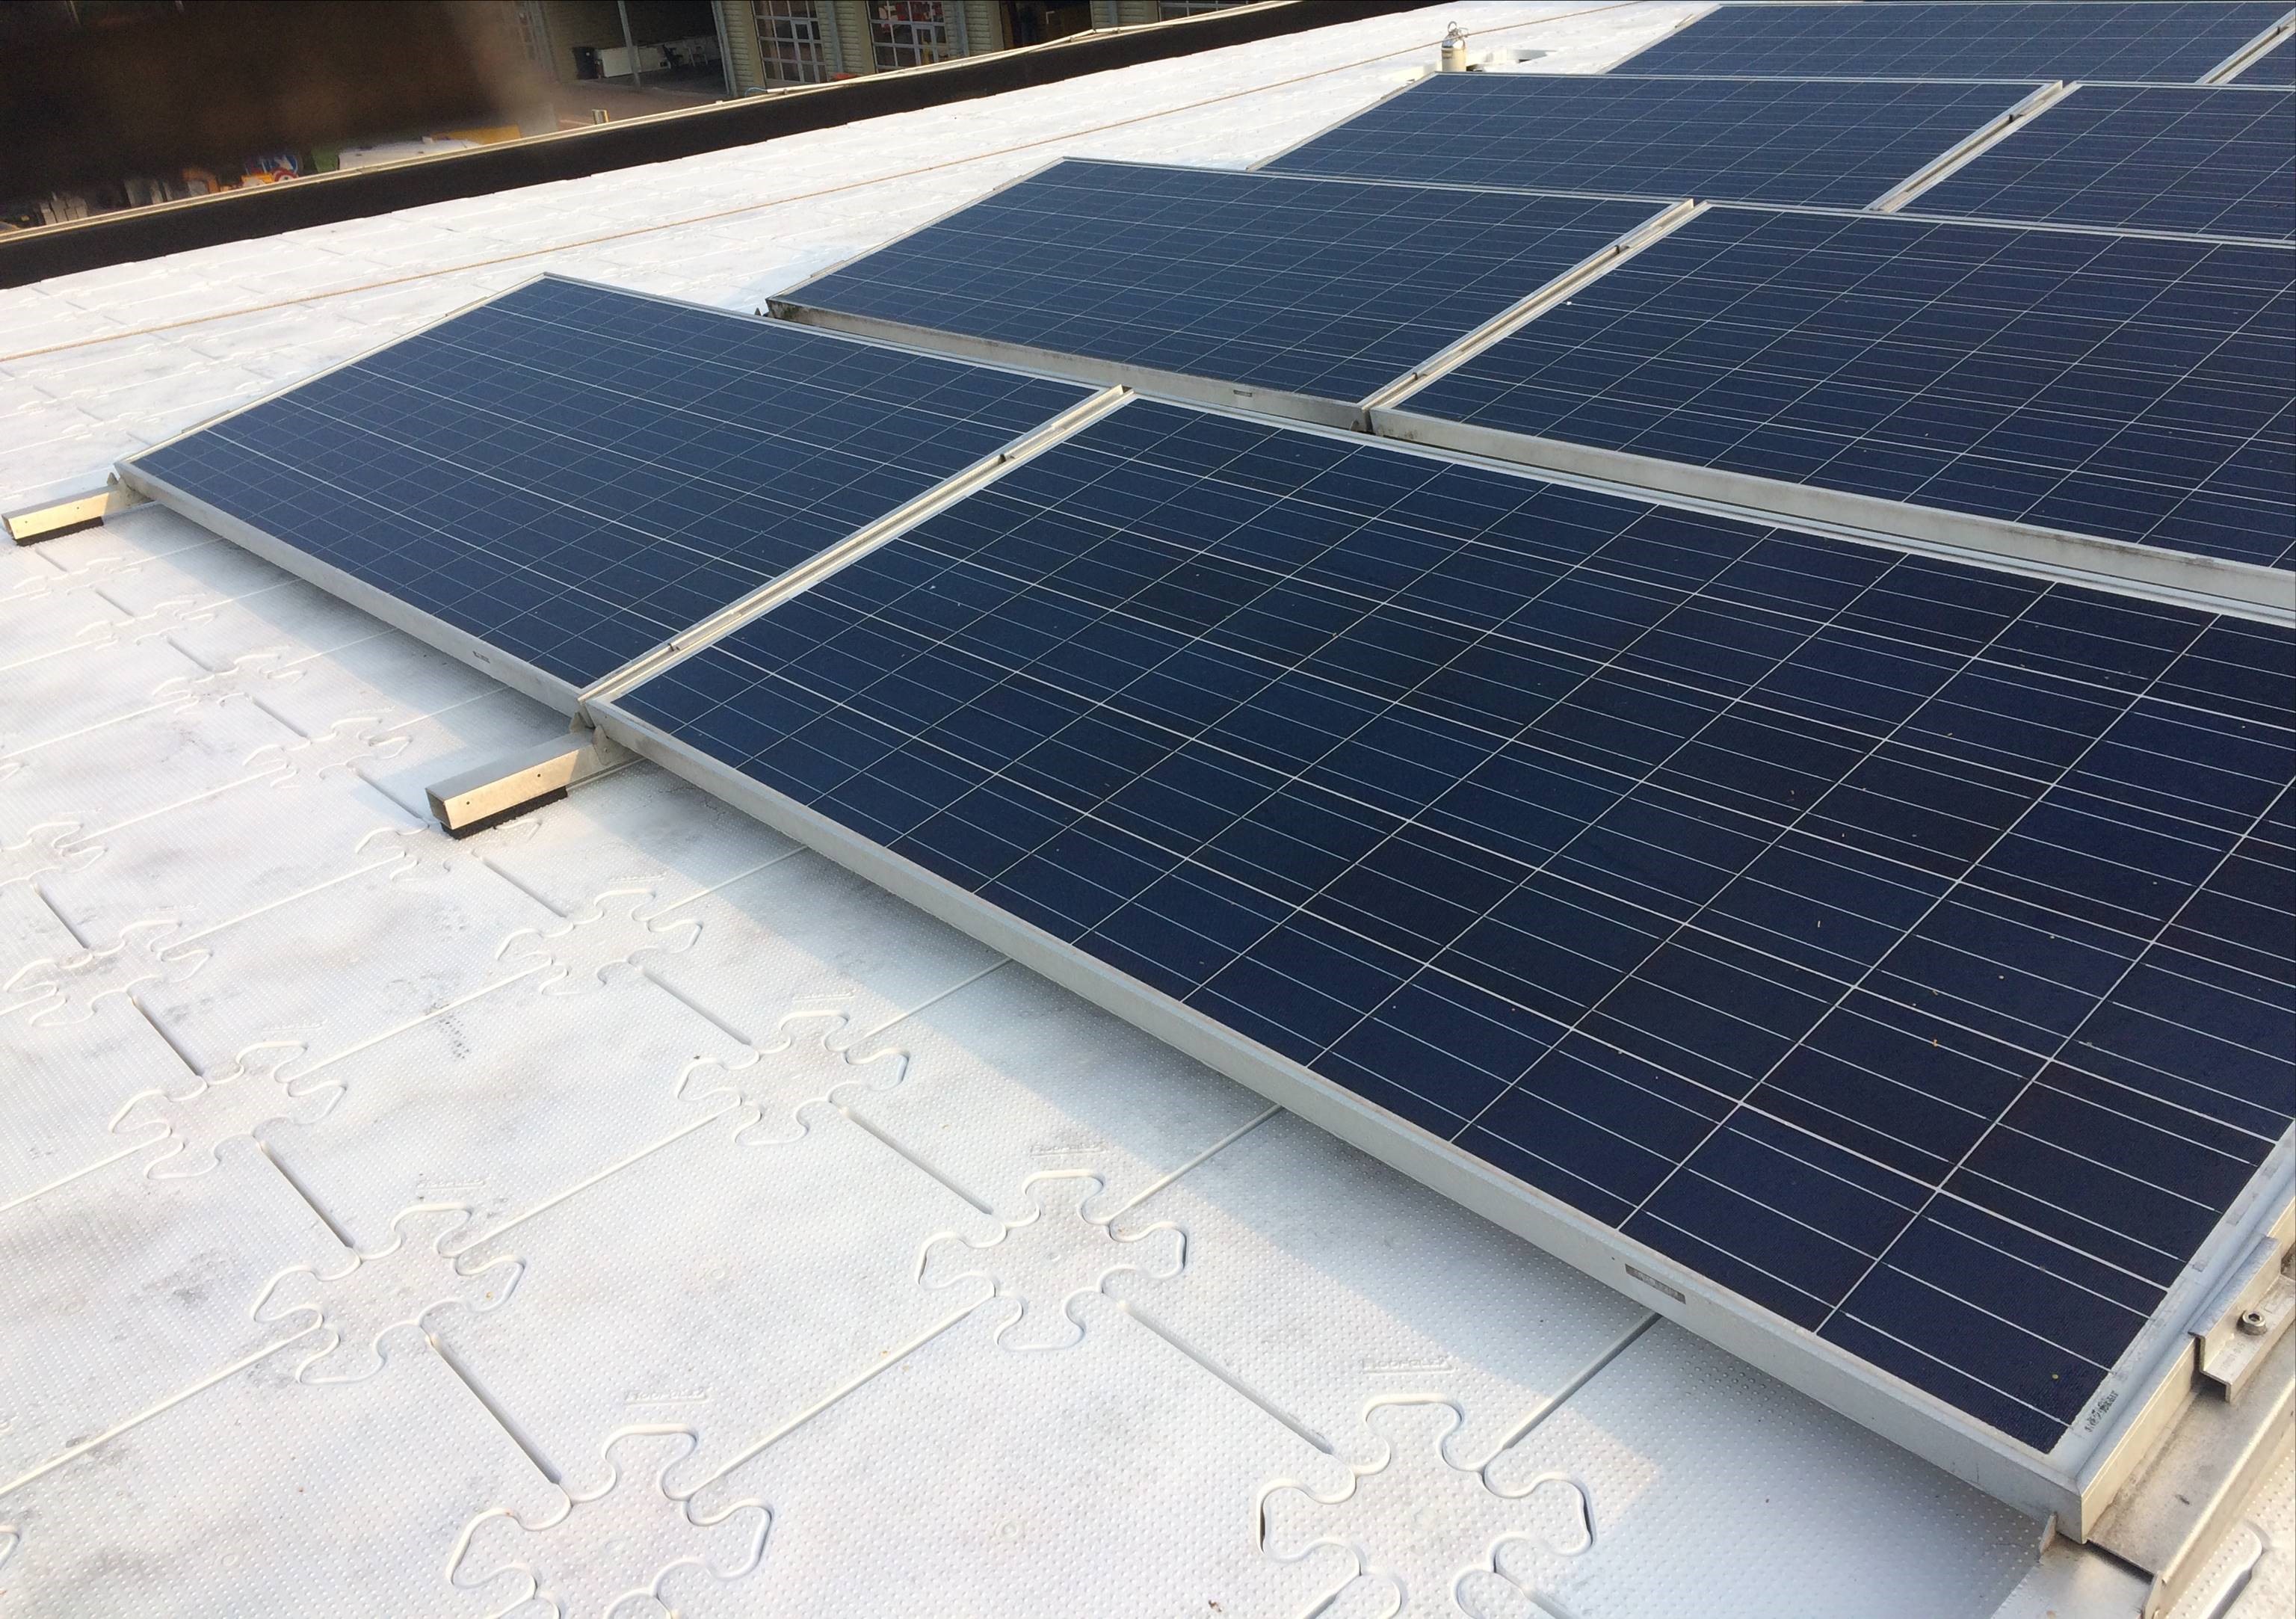 Solar panelling system installed on rooftop mounted with RoofClix panels